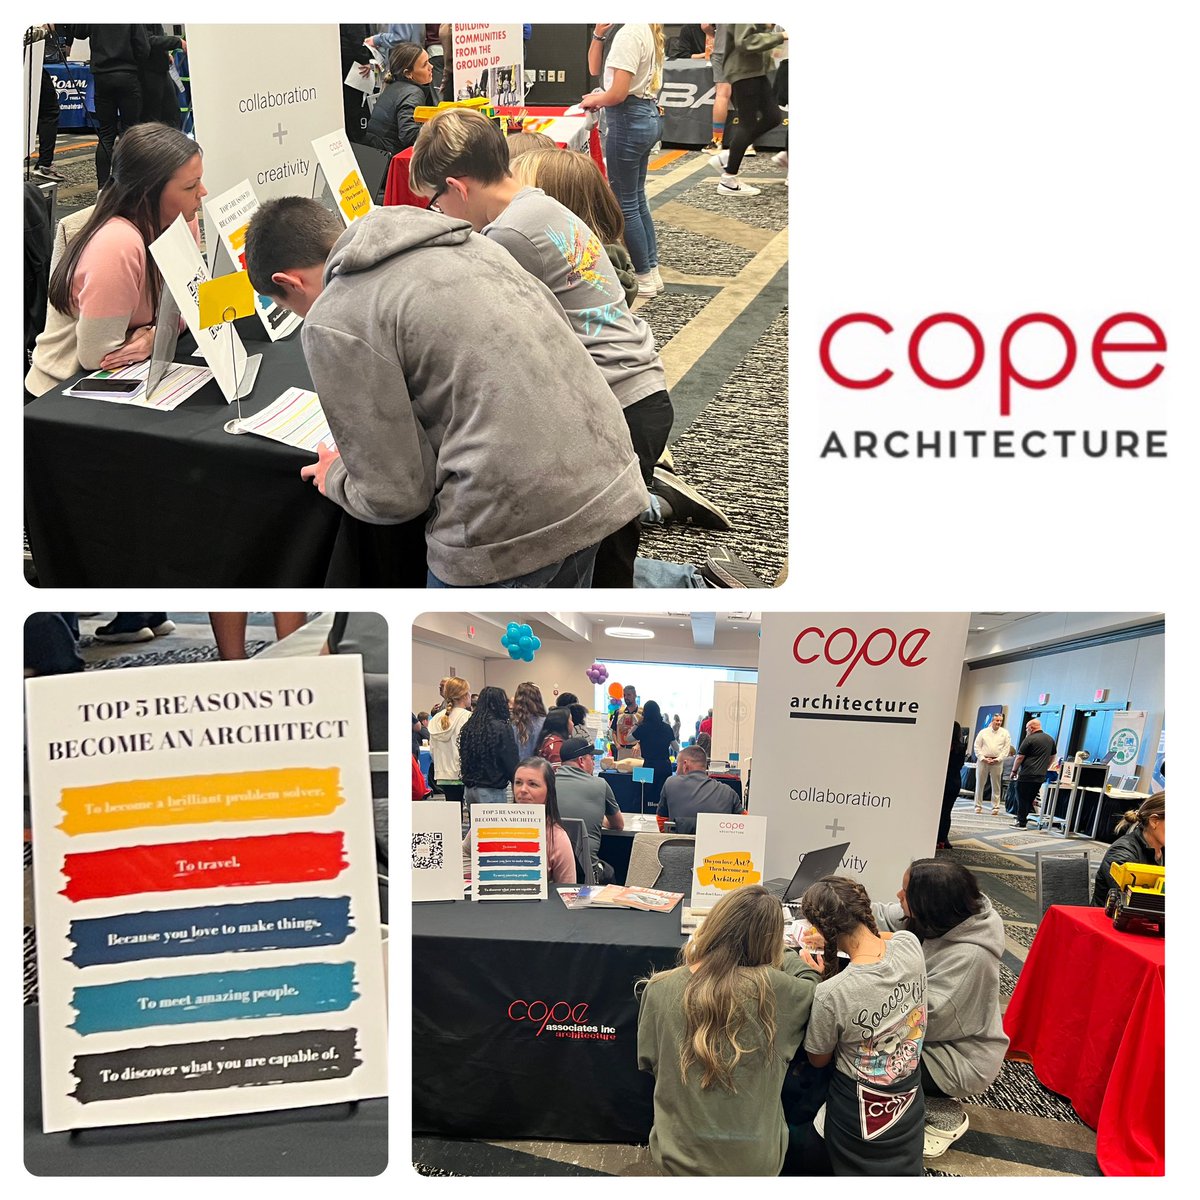 We really enjoyed visiting with 8th grade students yesterday at their Career Exploration Fair. They had great questions and the future is bright!! #becomeanarchitect #youcanhandlethemath #createeveryday @MC_Schools @BC_Schools @AlcoaSchools @blountchamber